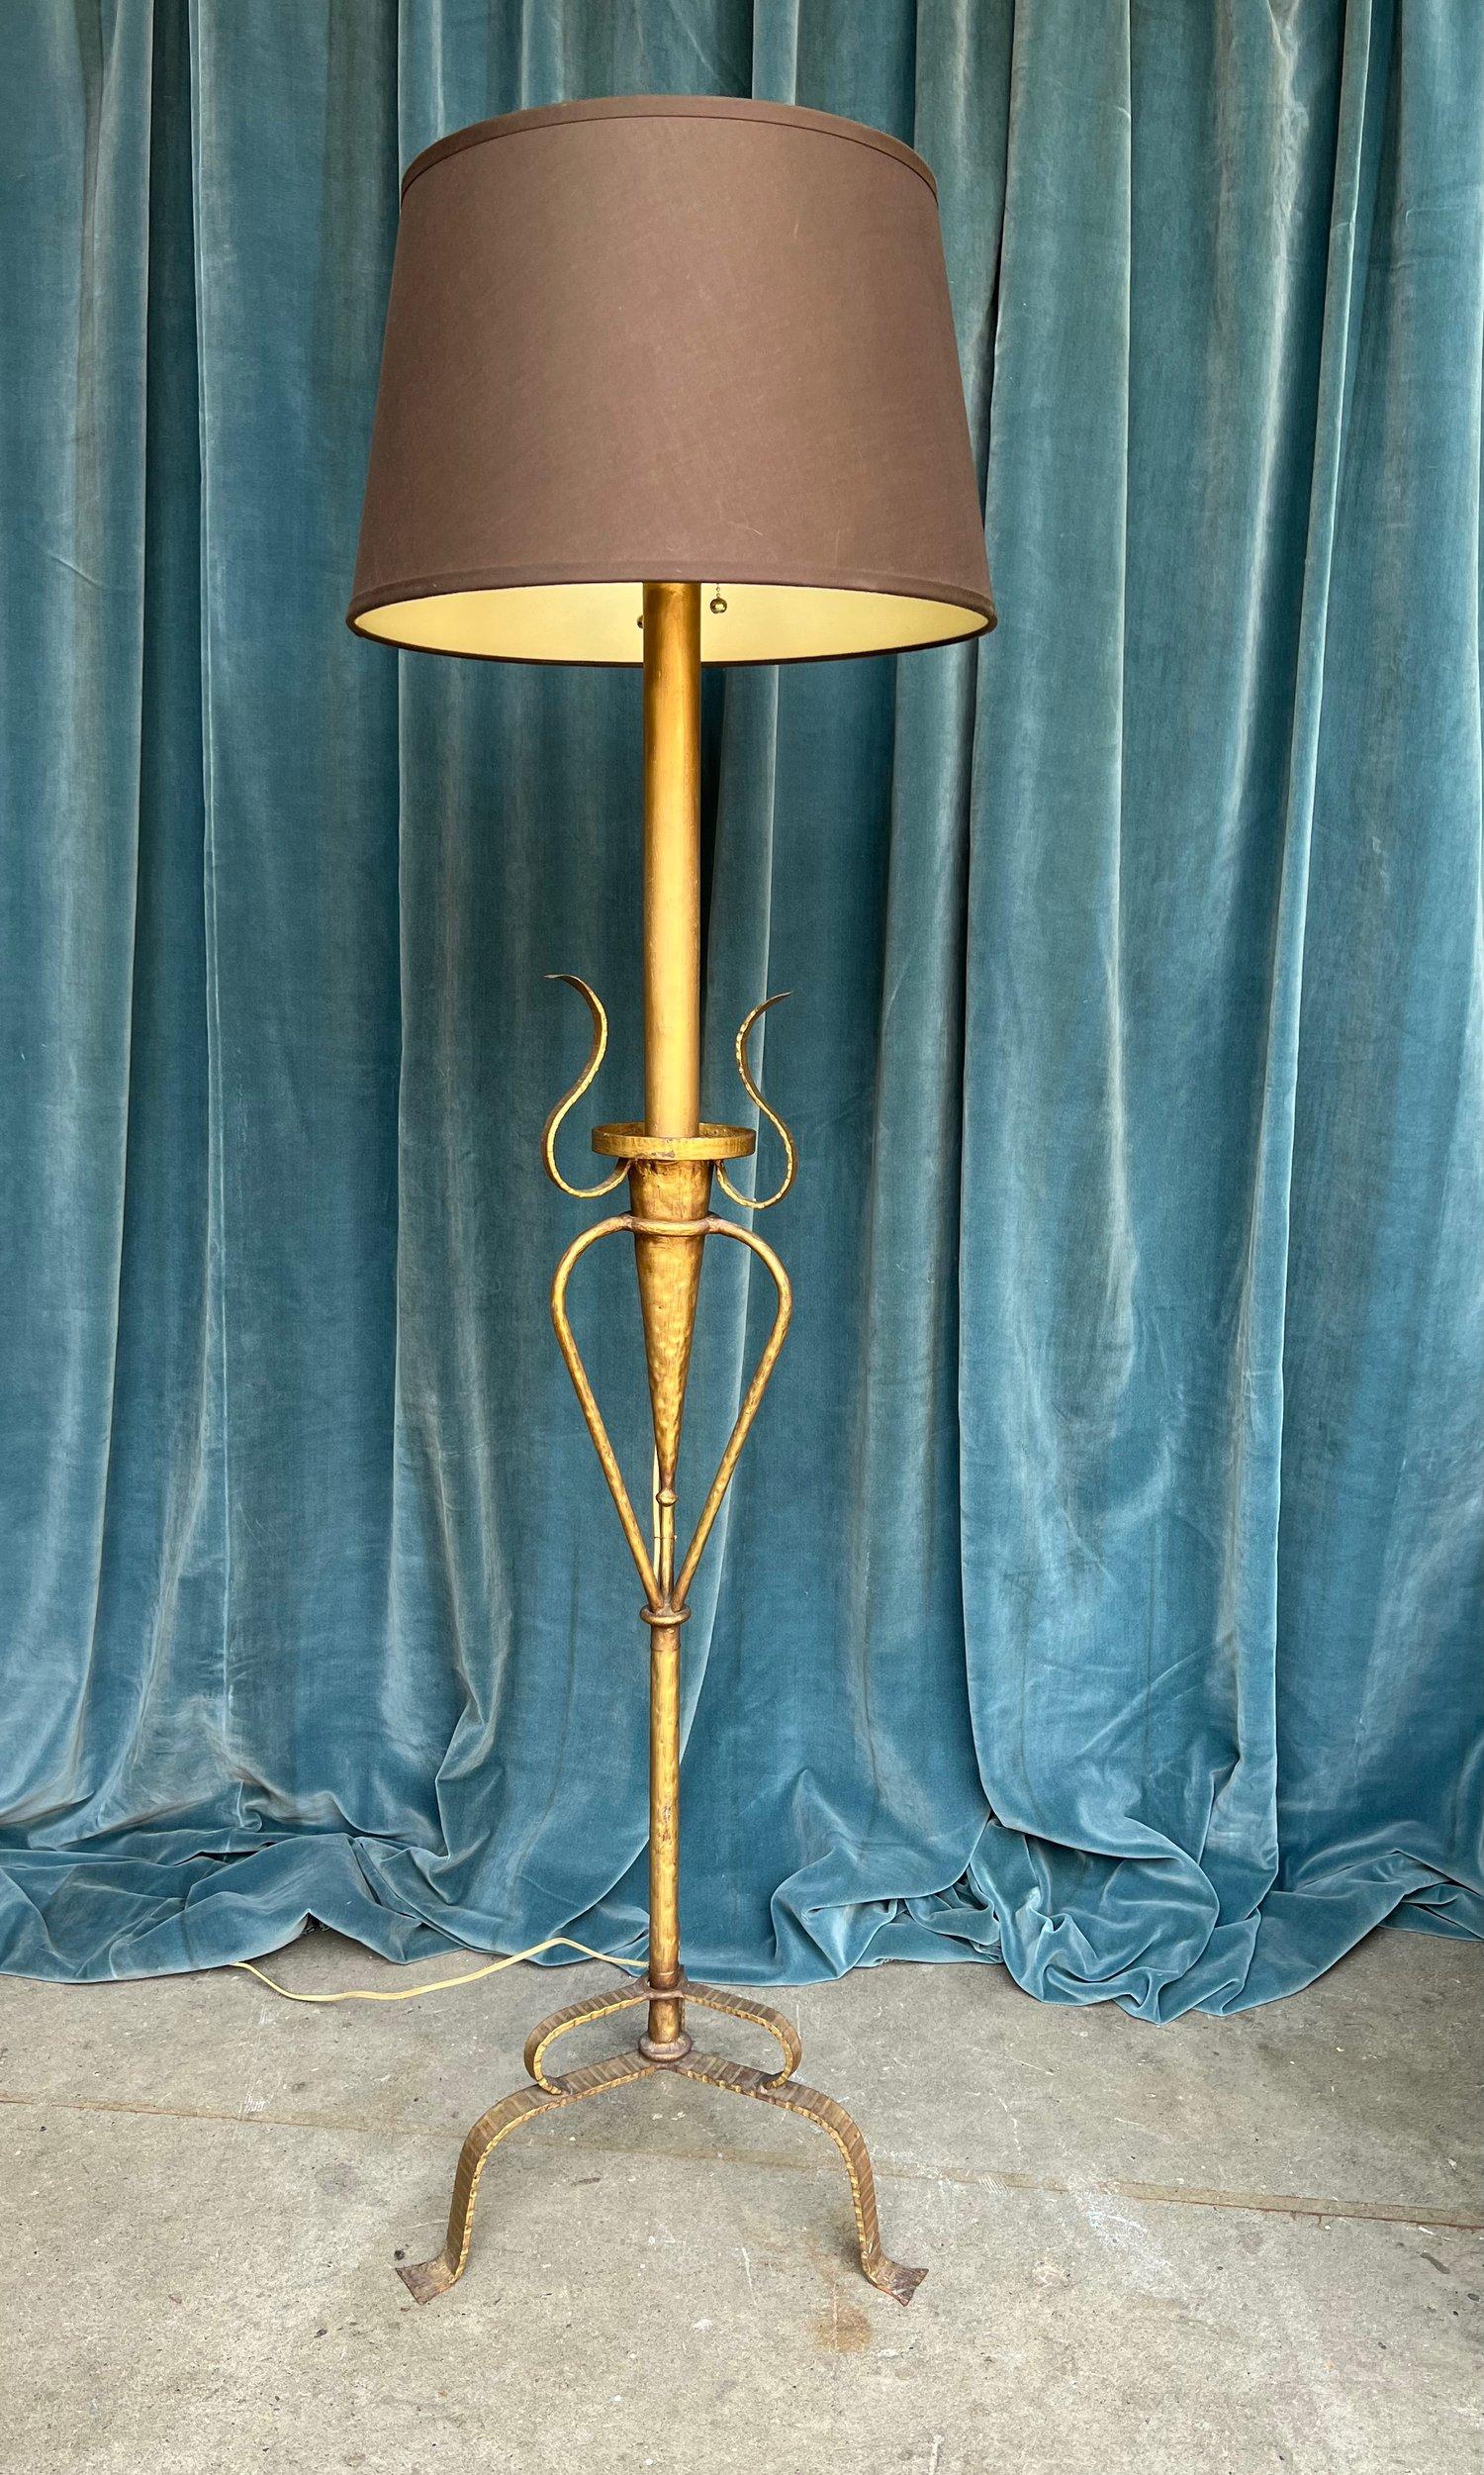 Spanish Gilt Iron Floor Lamp with Ornate Base In Good Condition For Sale In Buchanan, NY